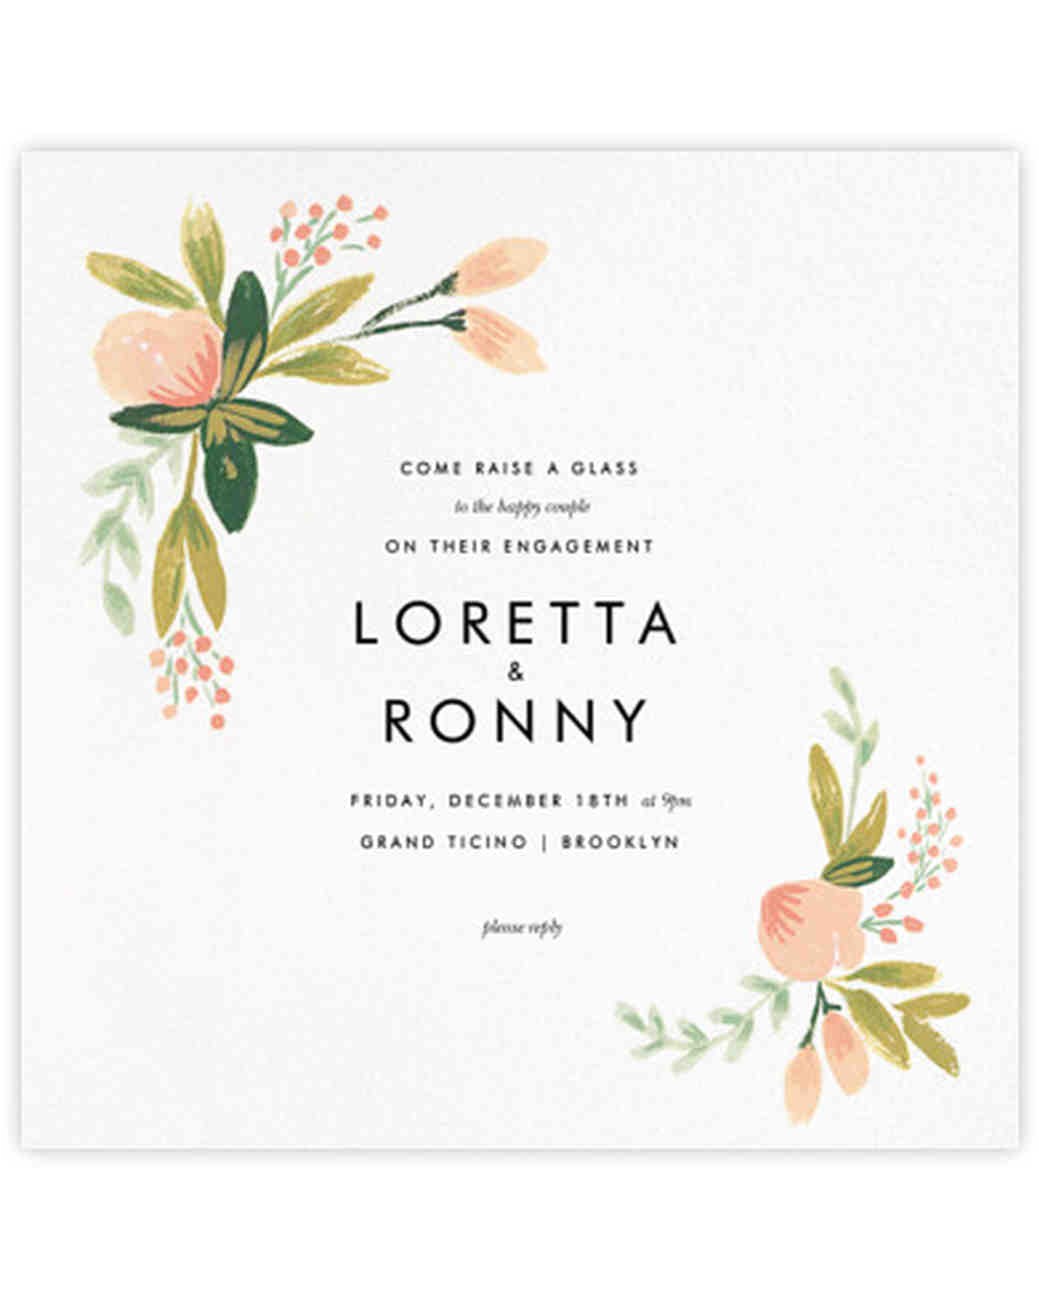 paperless engagement party invitations